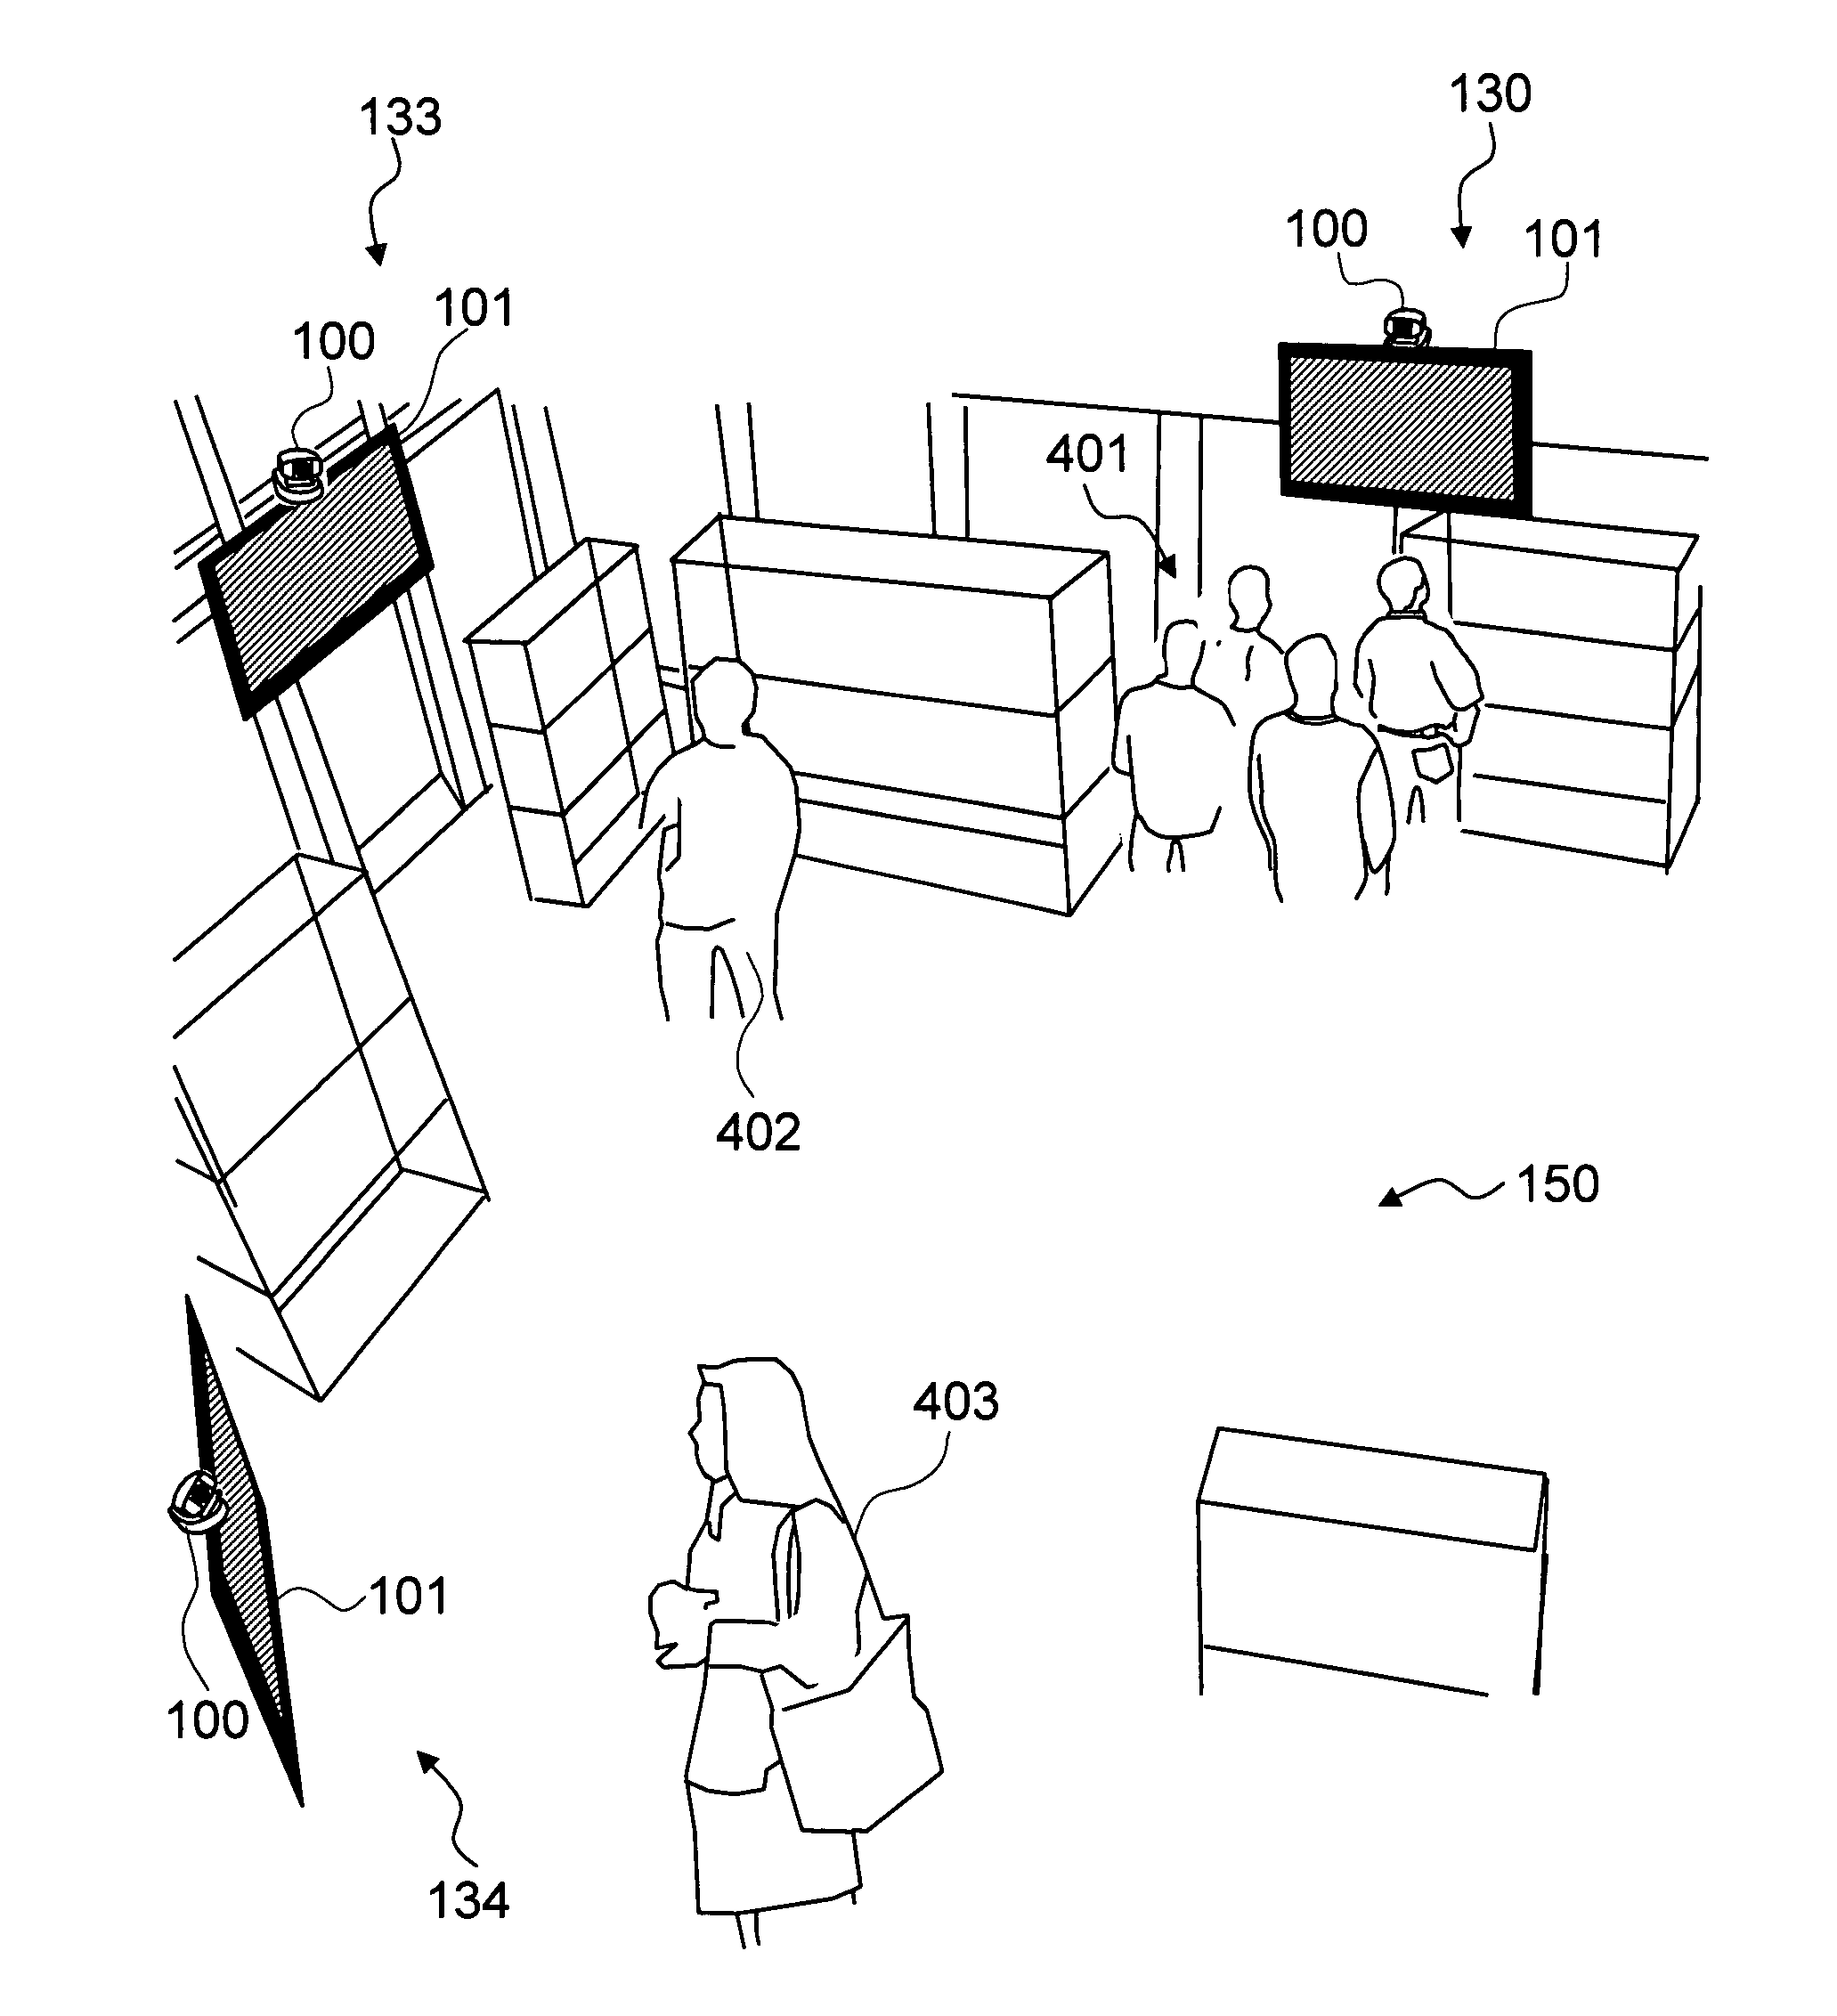 Method and system for automatically measuring and forecasting the demographic characterization of customers to help customize programming contents in a media network